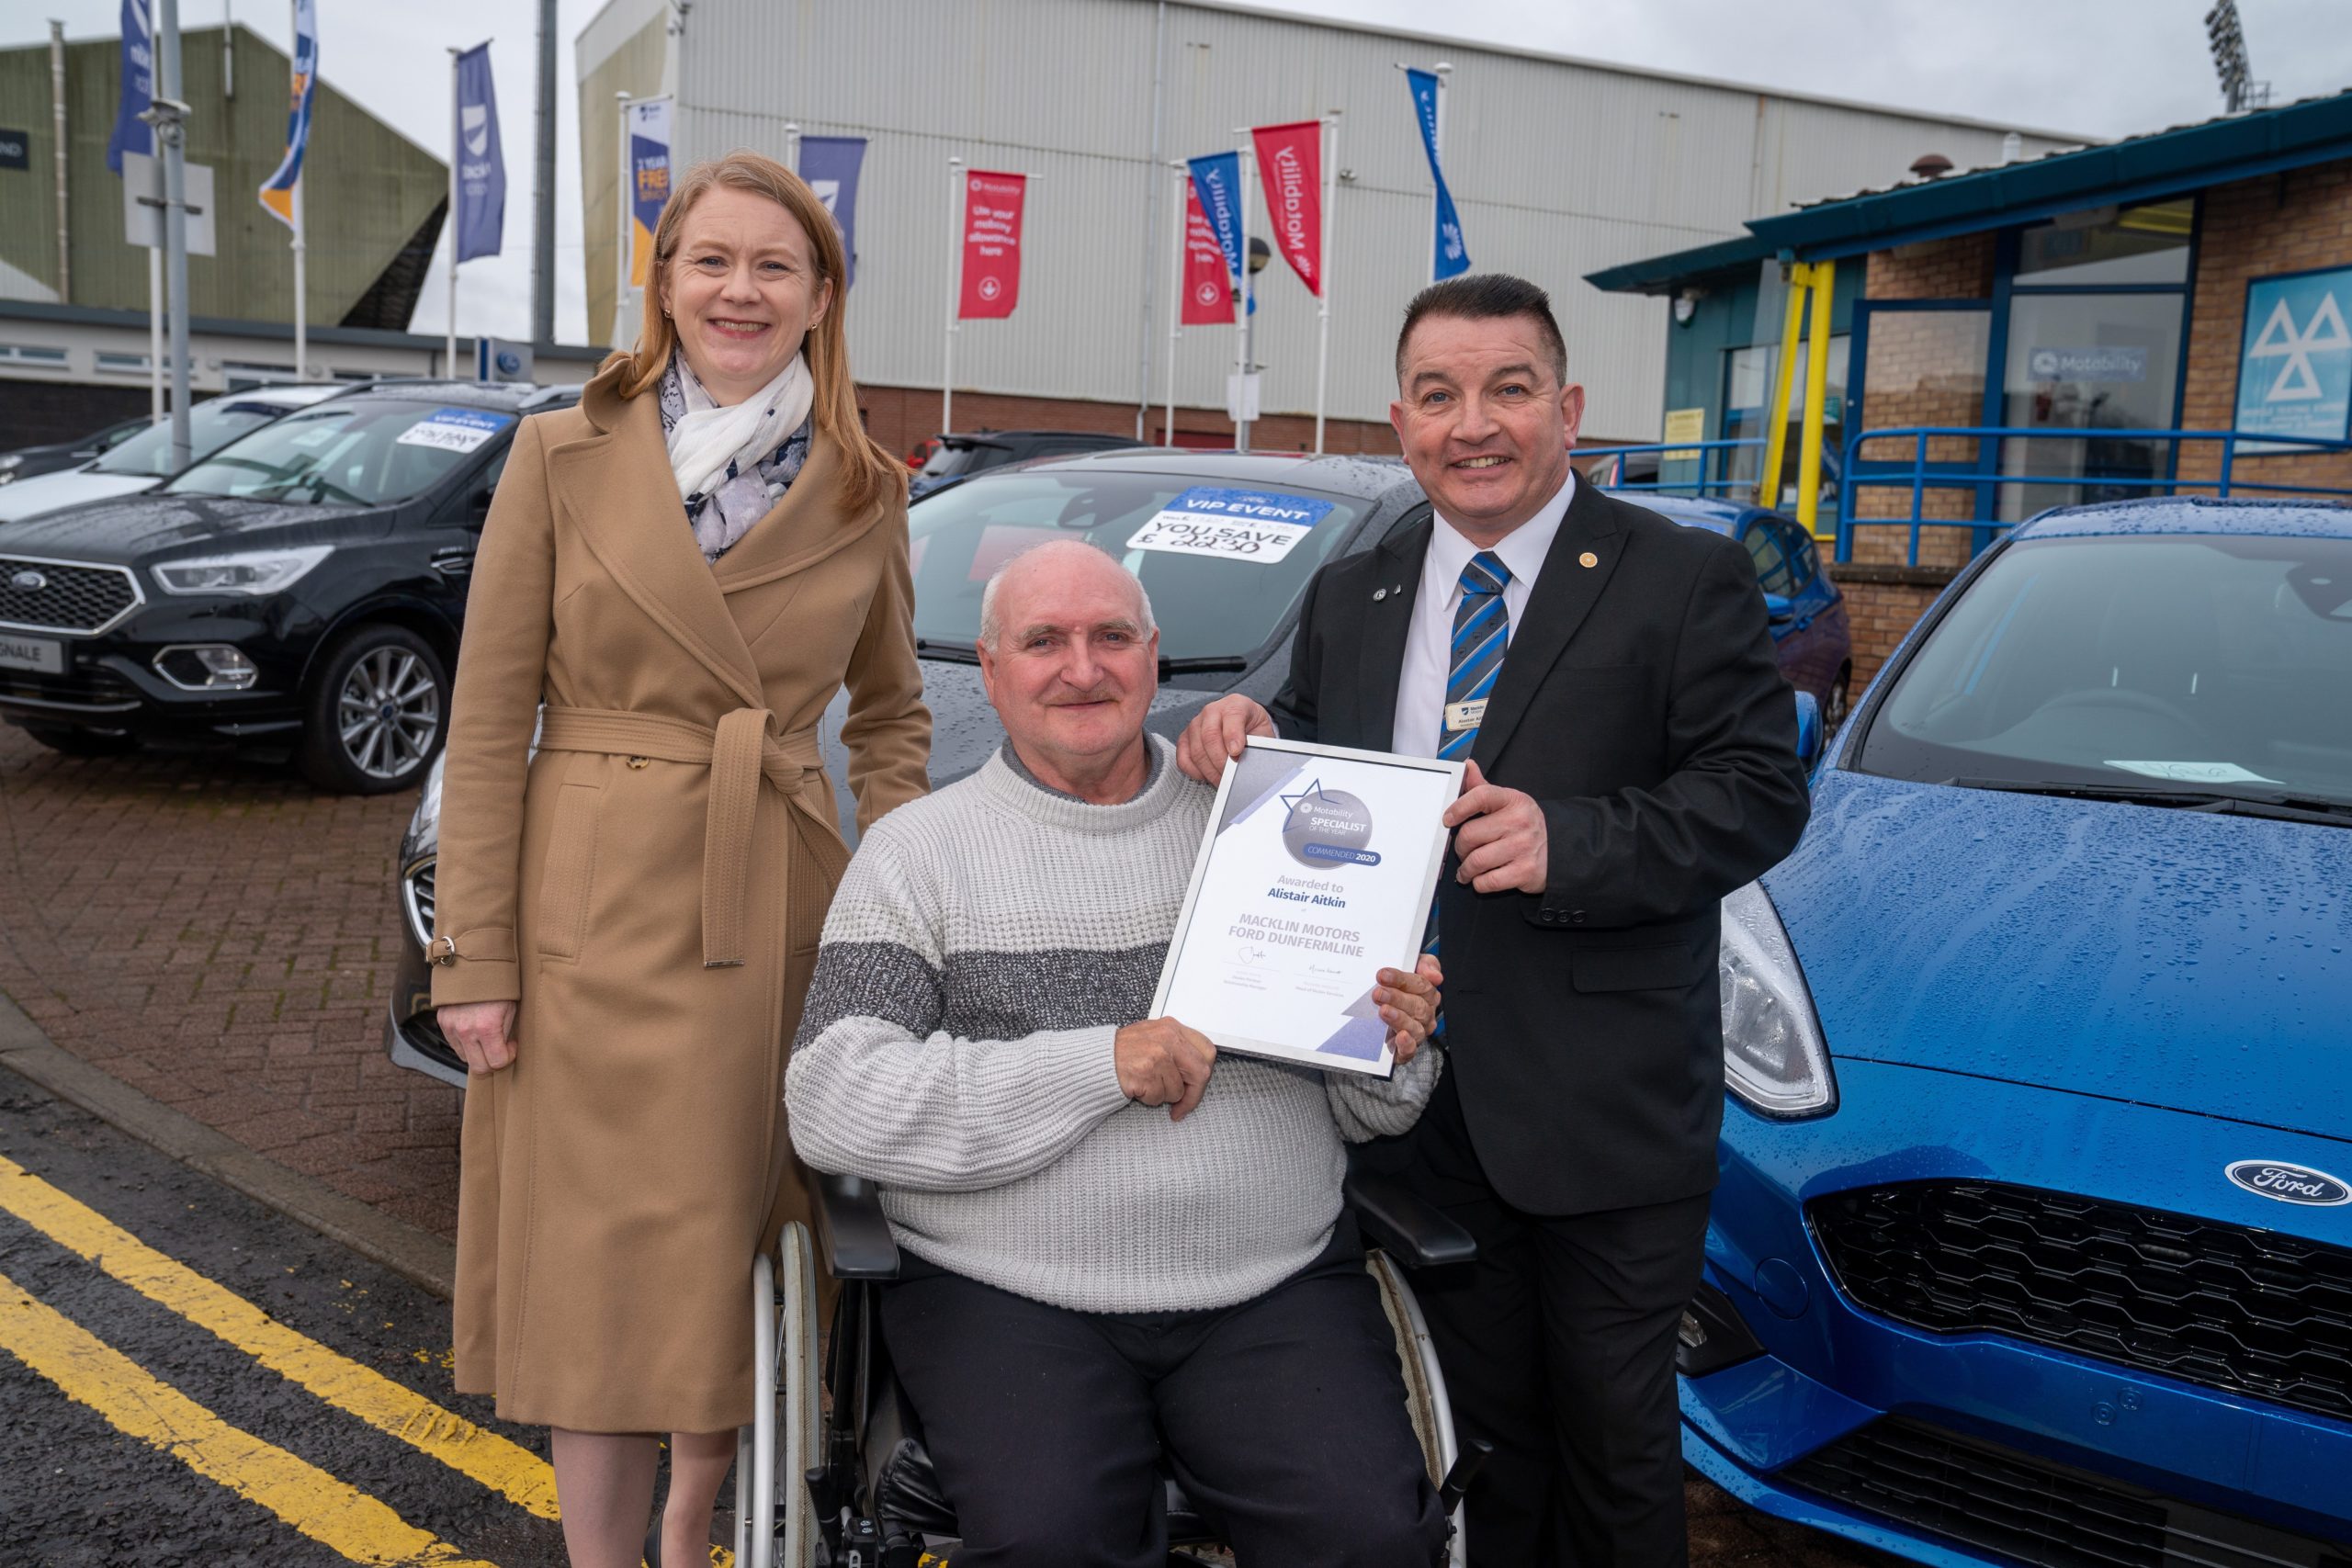 Social Security Secretary Shirley-Anne Somerville with Kenneth Harper and Alastair Aitken, Motability specialist at Macklin Motors in Dunfermline.